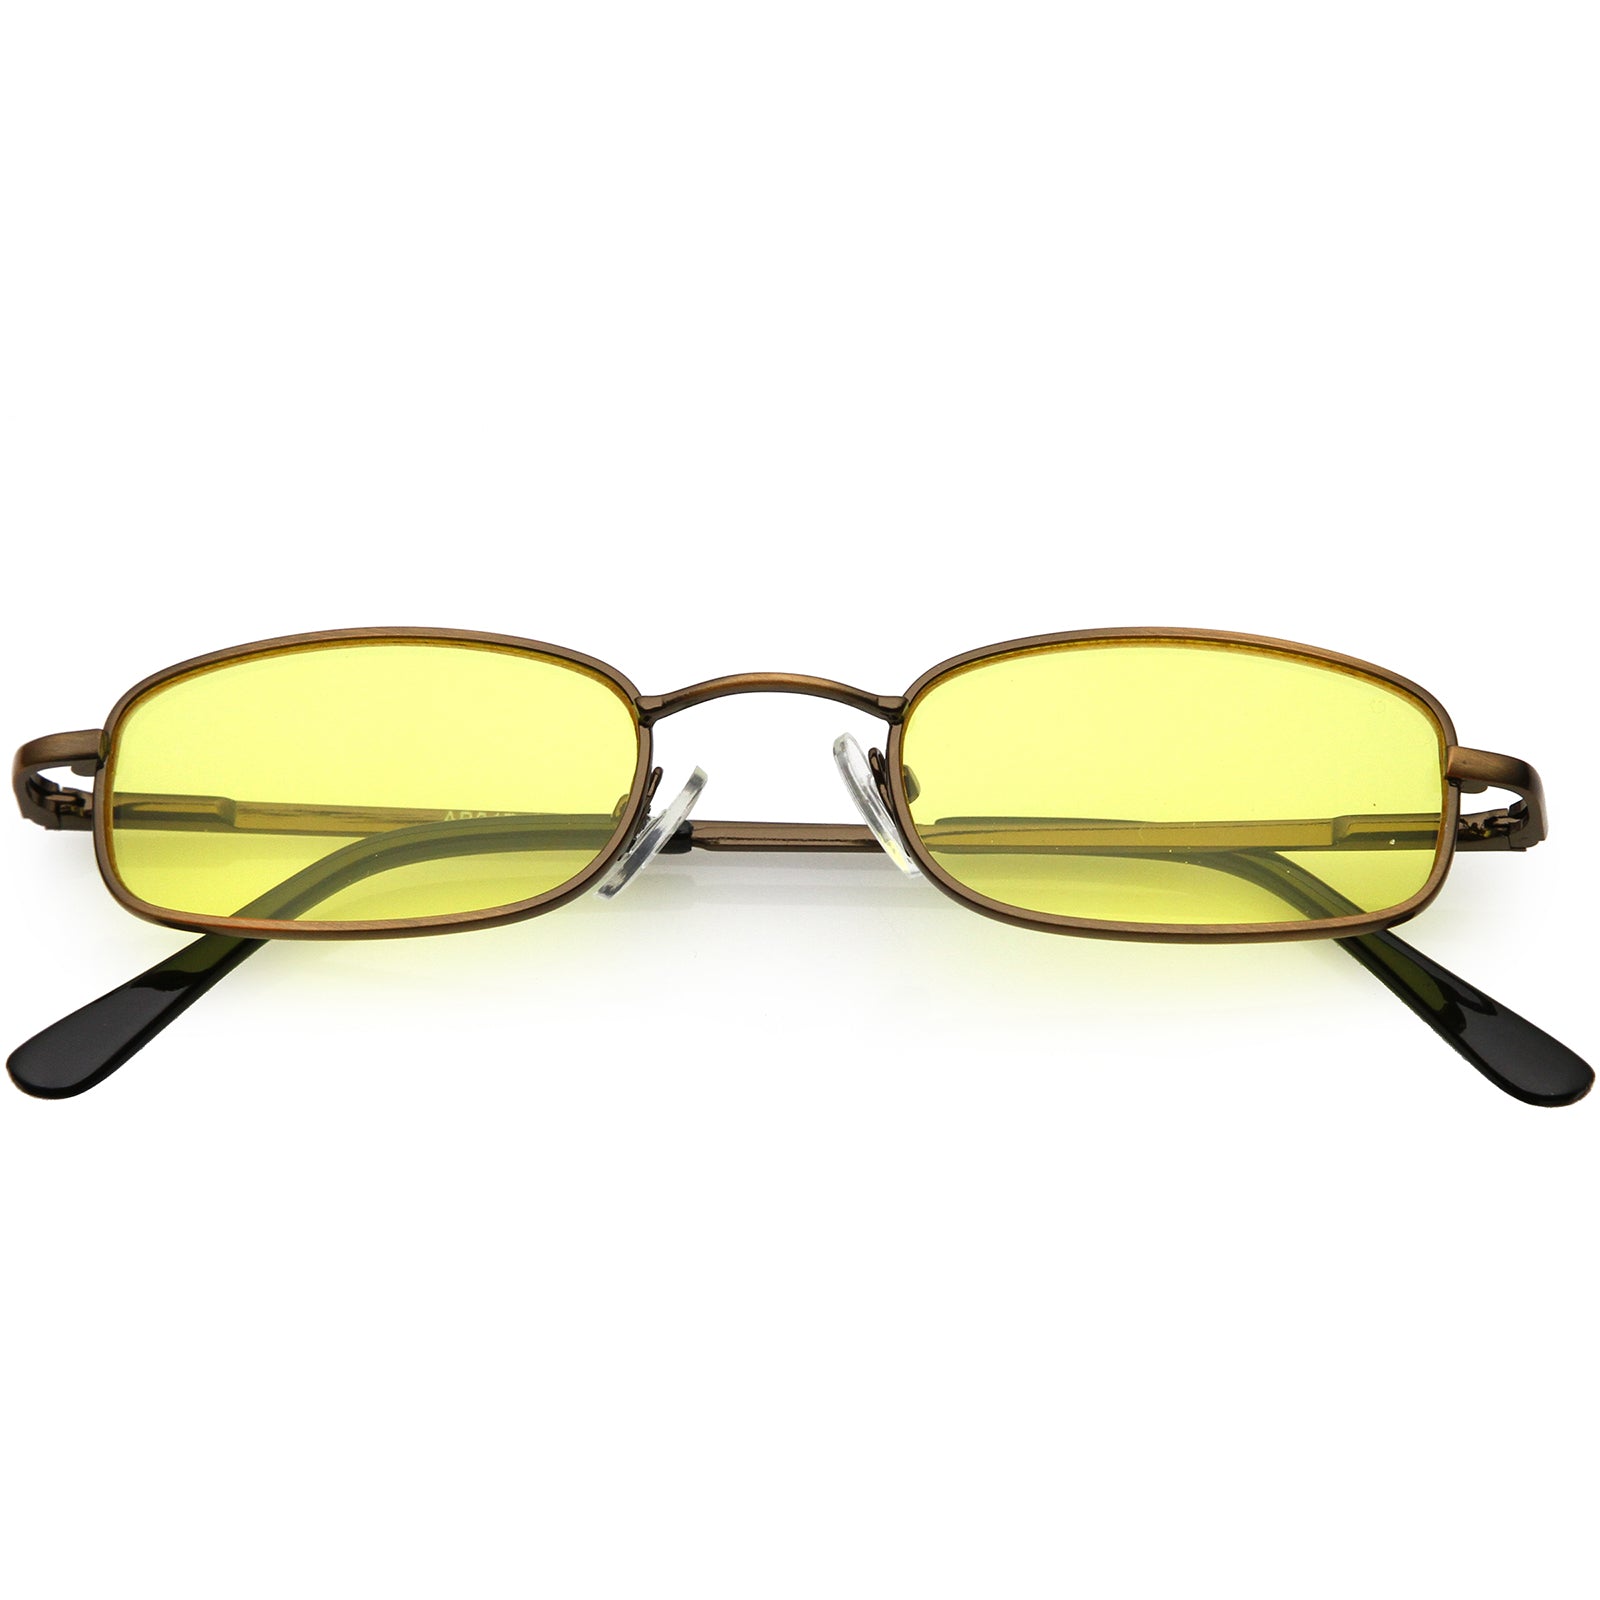 90s Small Rectangle Sunglasses Slim Arms Color Tinted Lens 45mm 